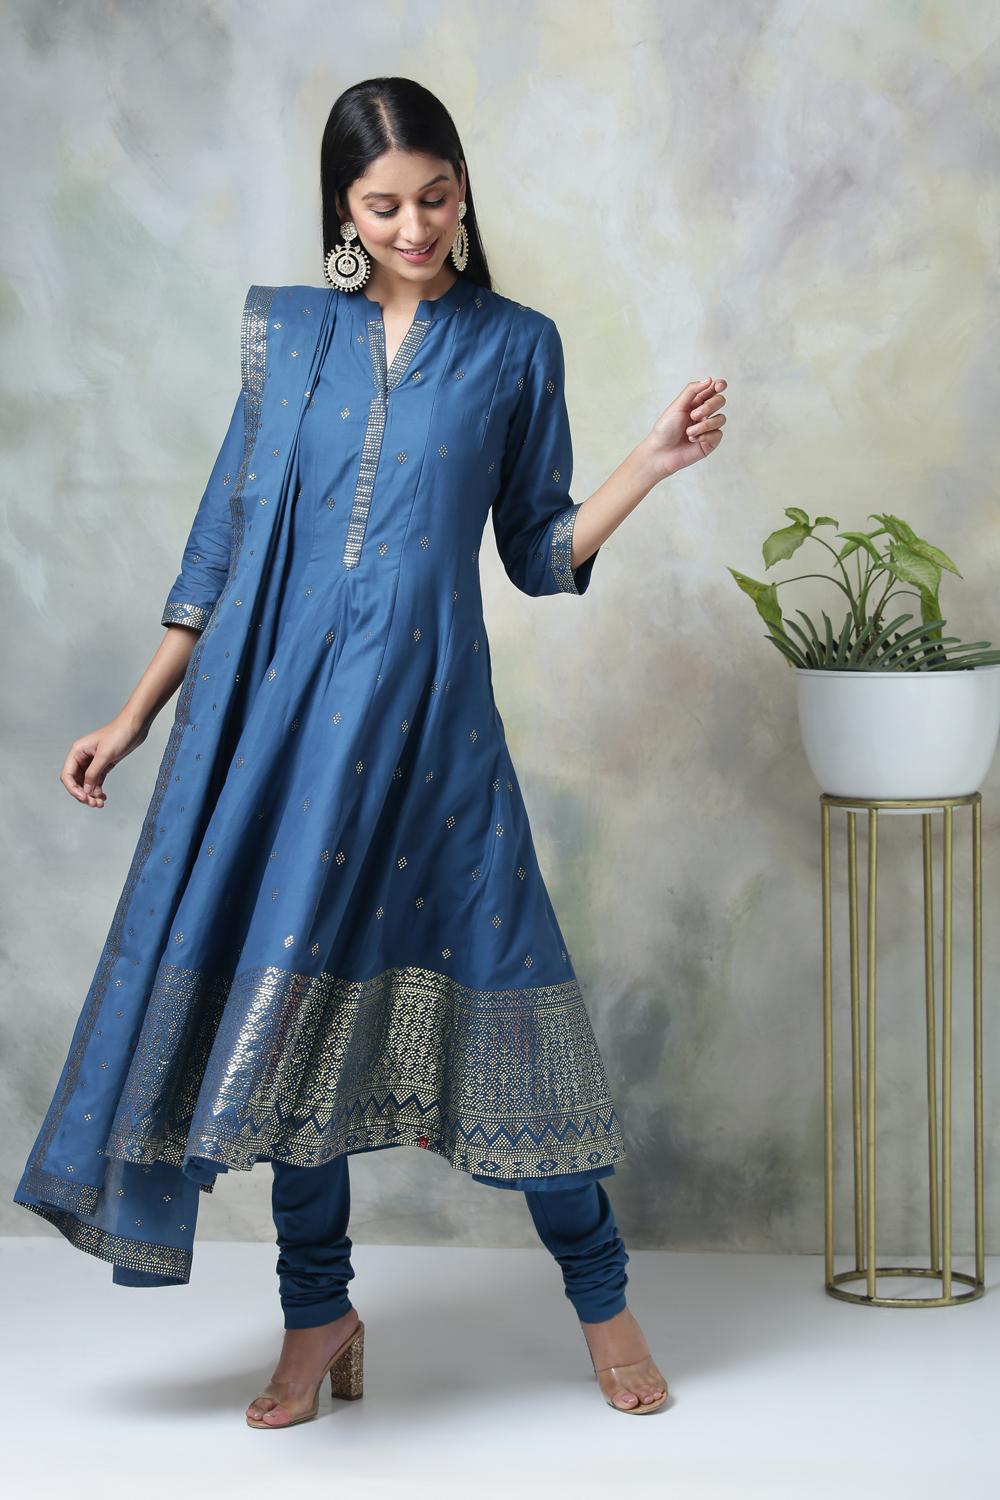 Buy Online Blue Cotton A Line Suit Set for Women & Girls at Best Prices ...